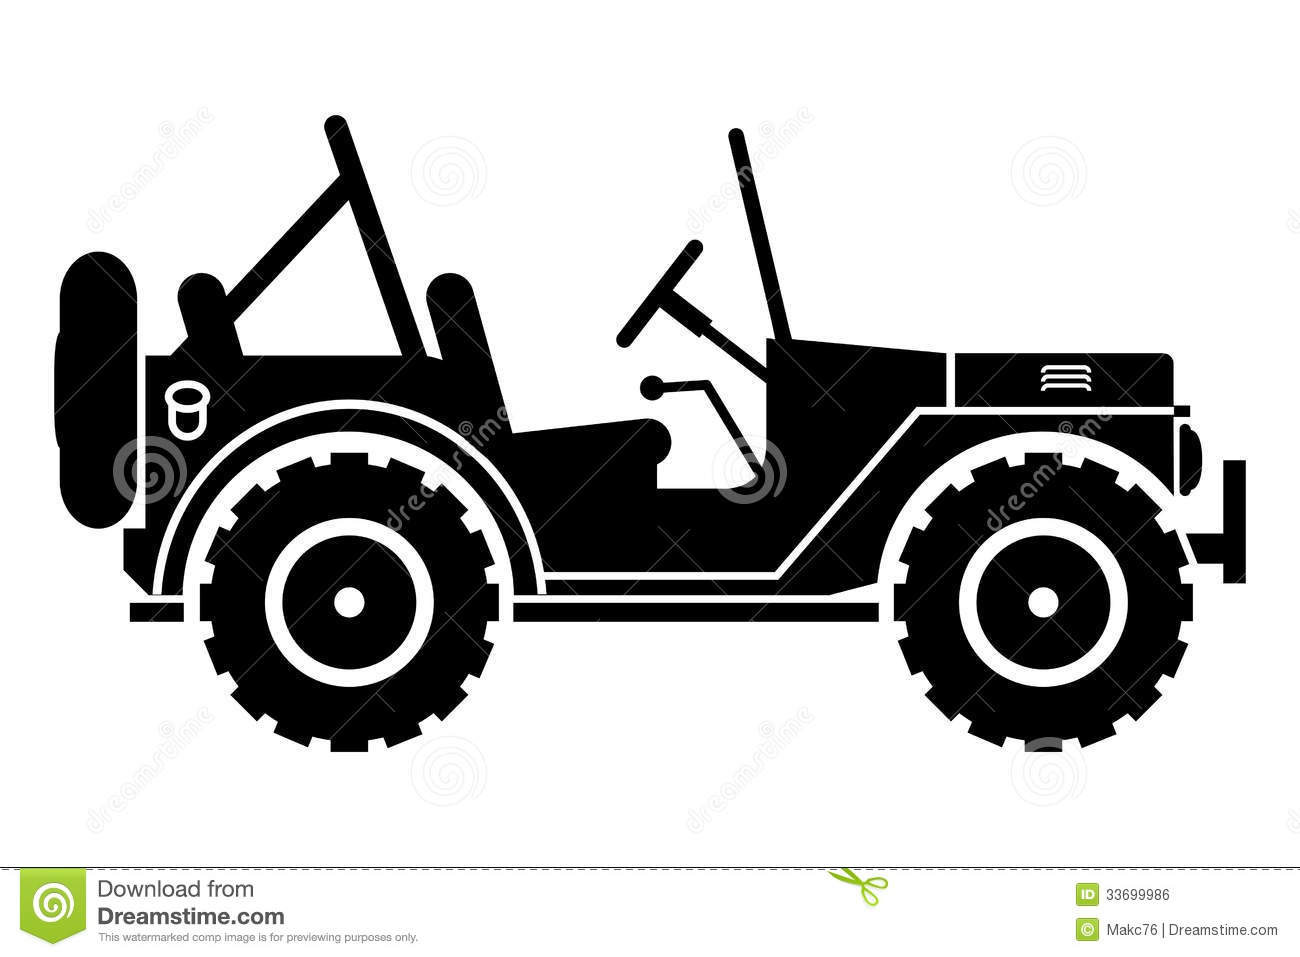 Jeep Silhouette  Royalty Free Stock Image   Image  33699986